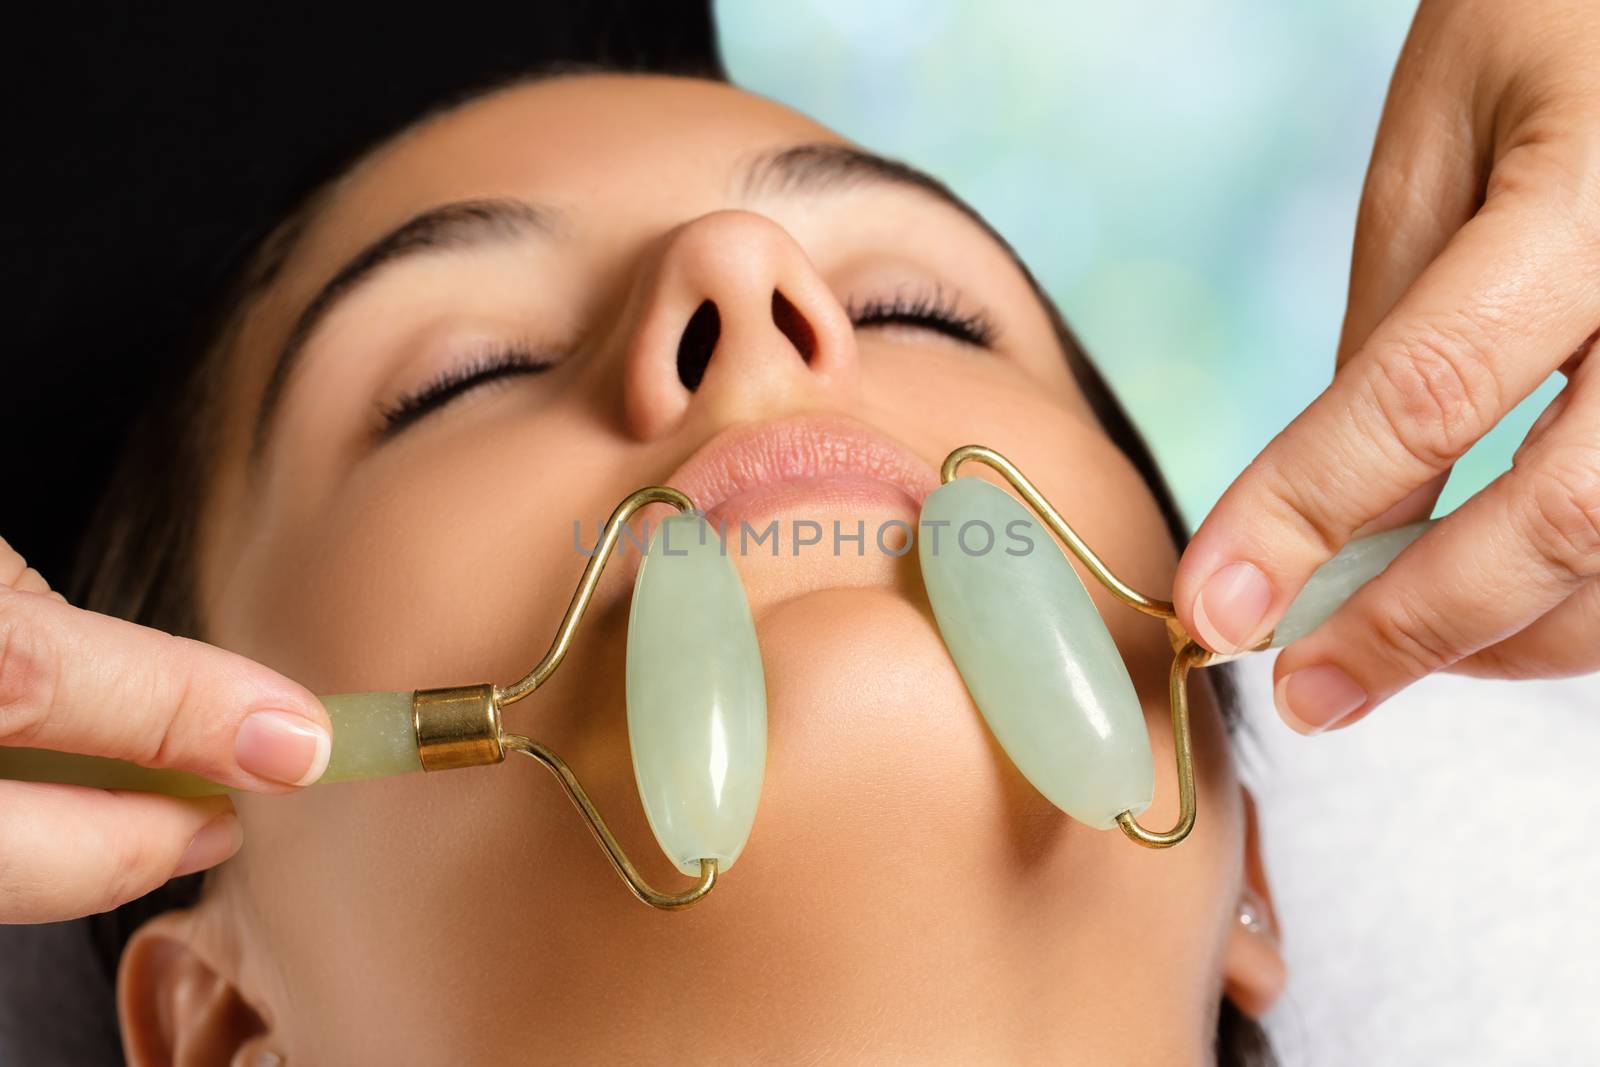 Macro close up portrait of woman having facial beauty treatment in spa. Therapist massaging chin with jade rollers.
